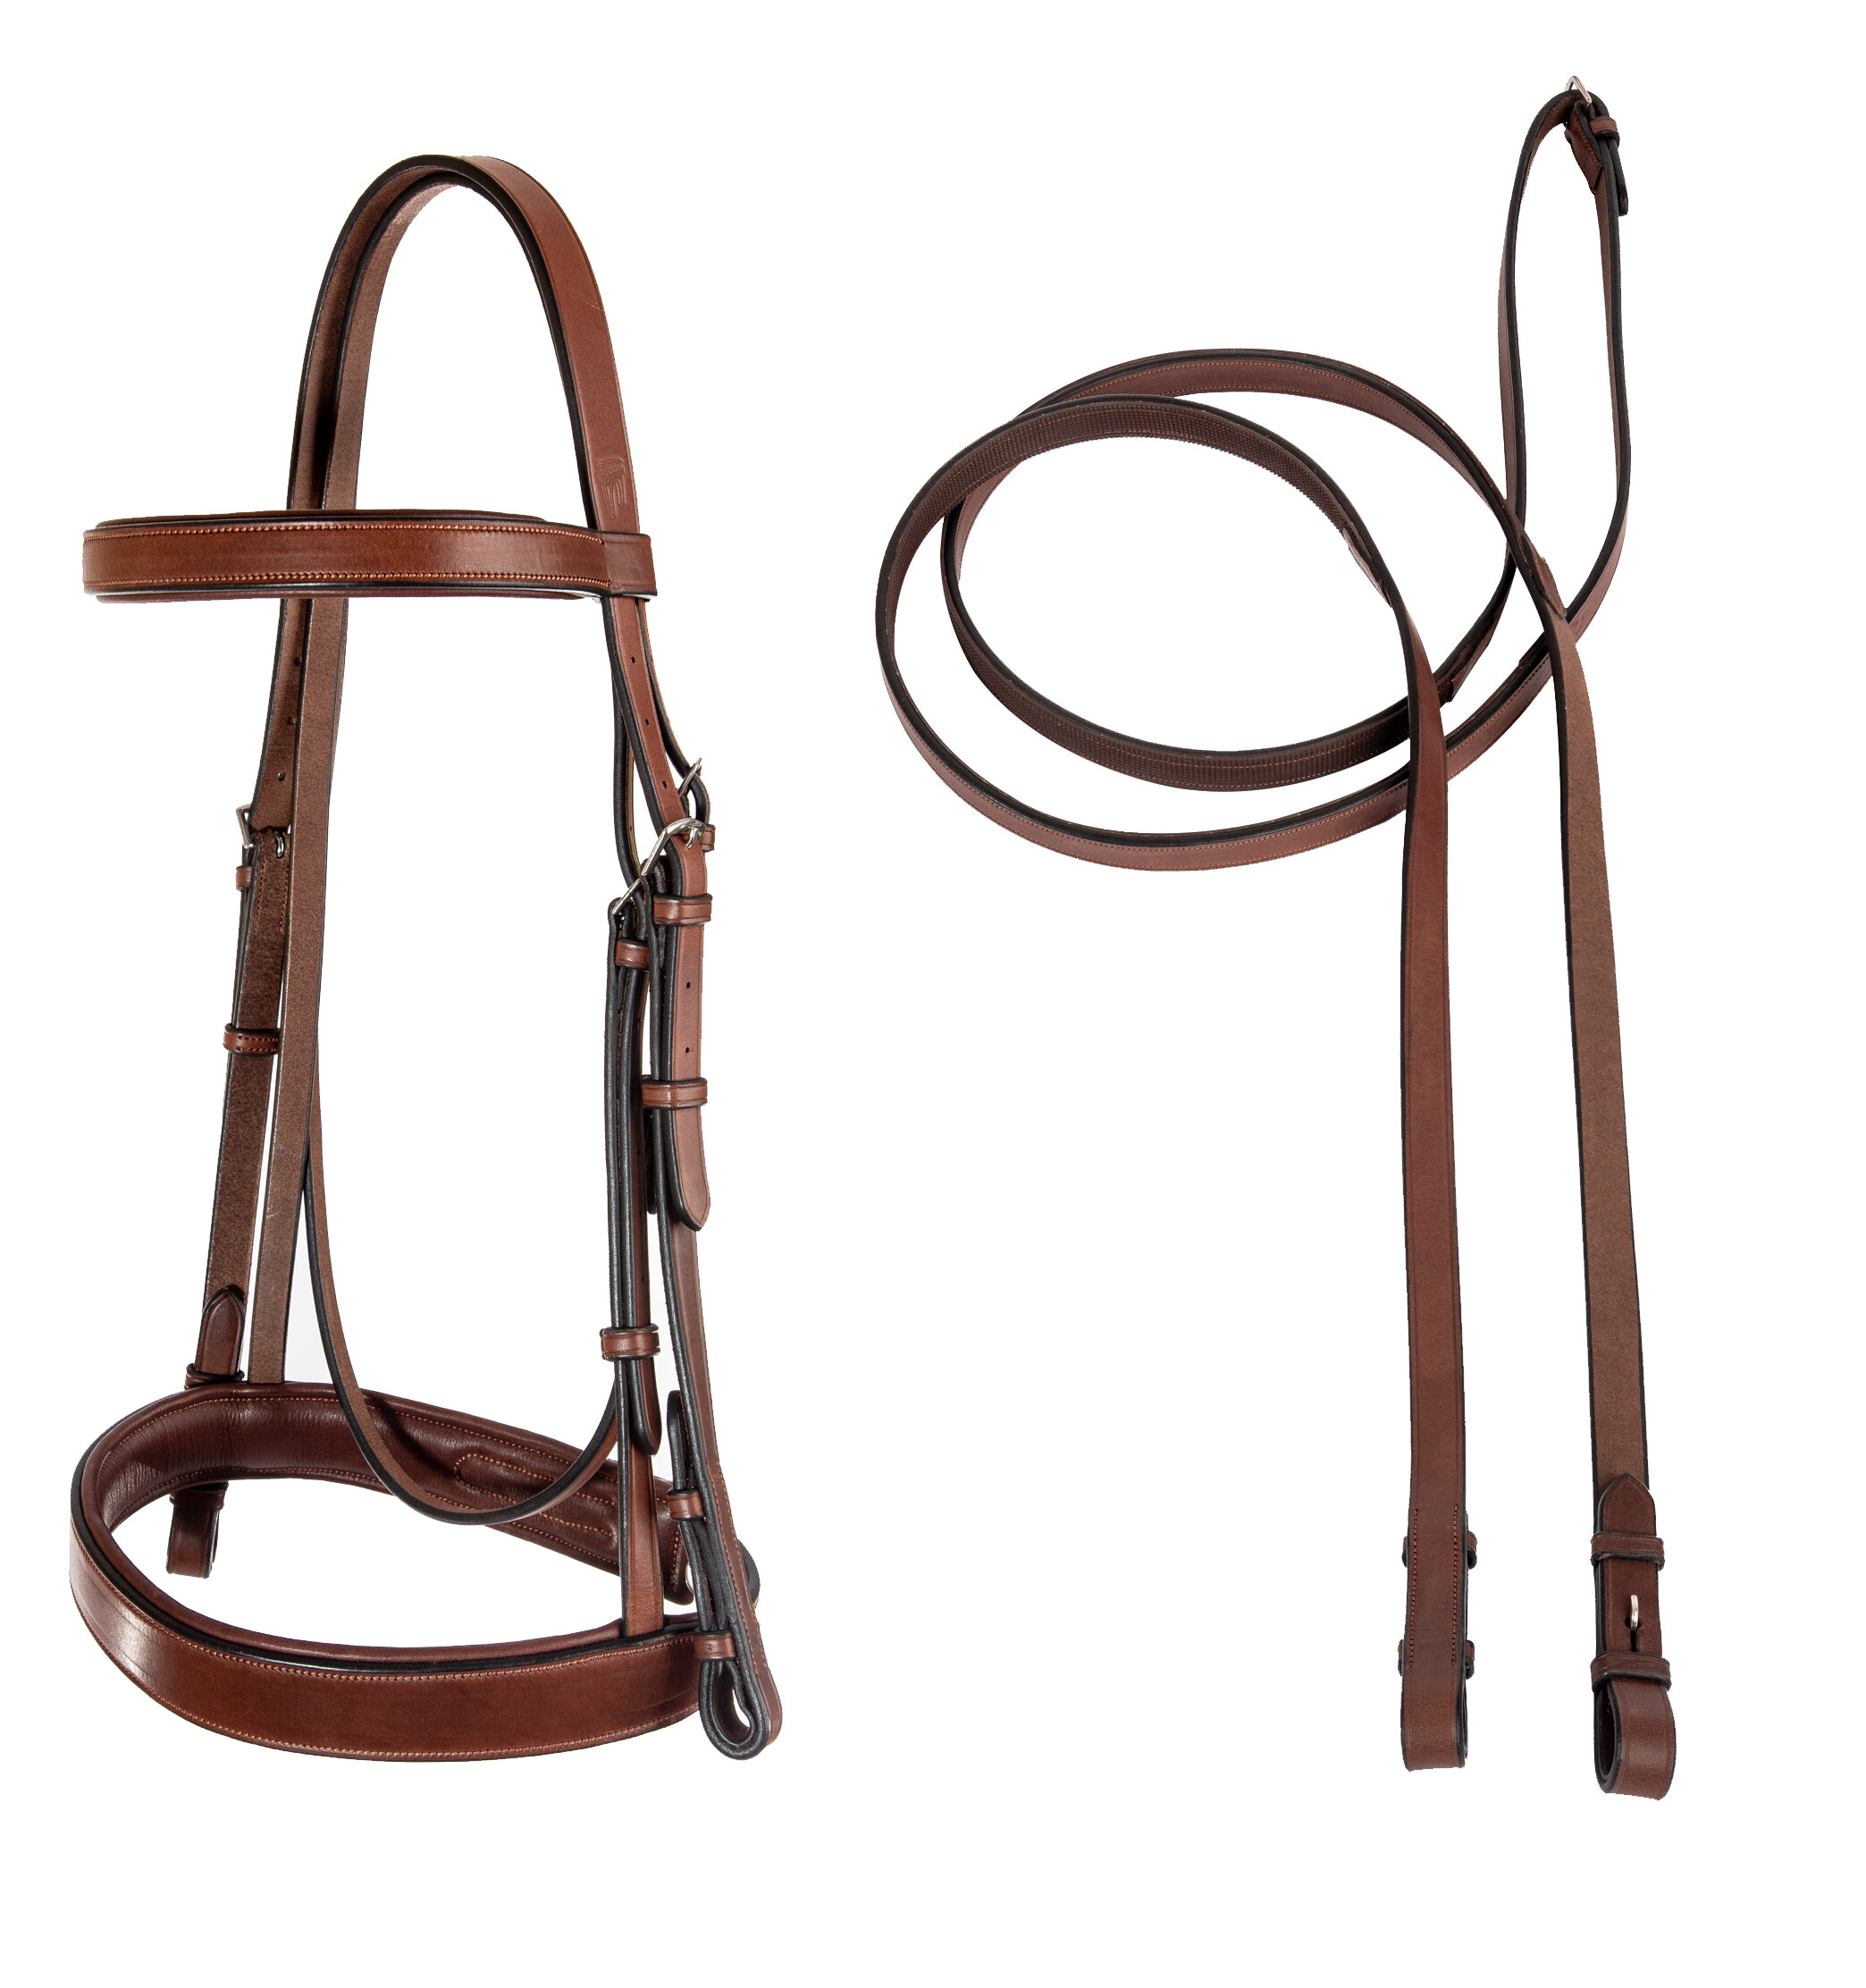 Stunning English Leather Hunting Bridle 3 Sizes In Black & Brown! 